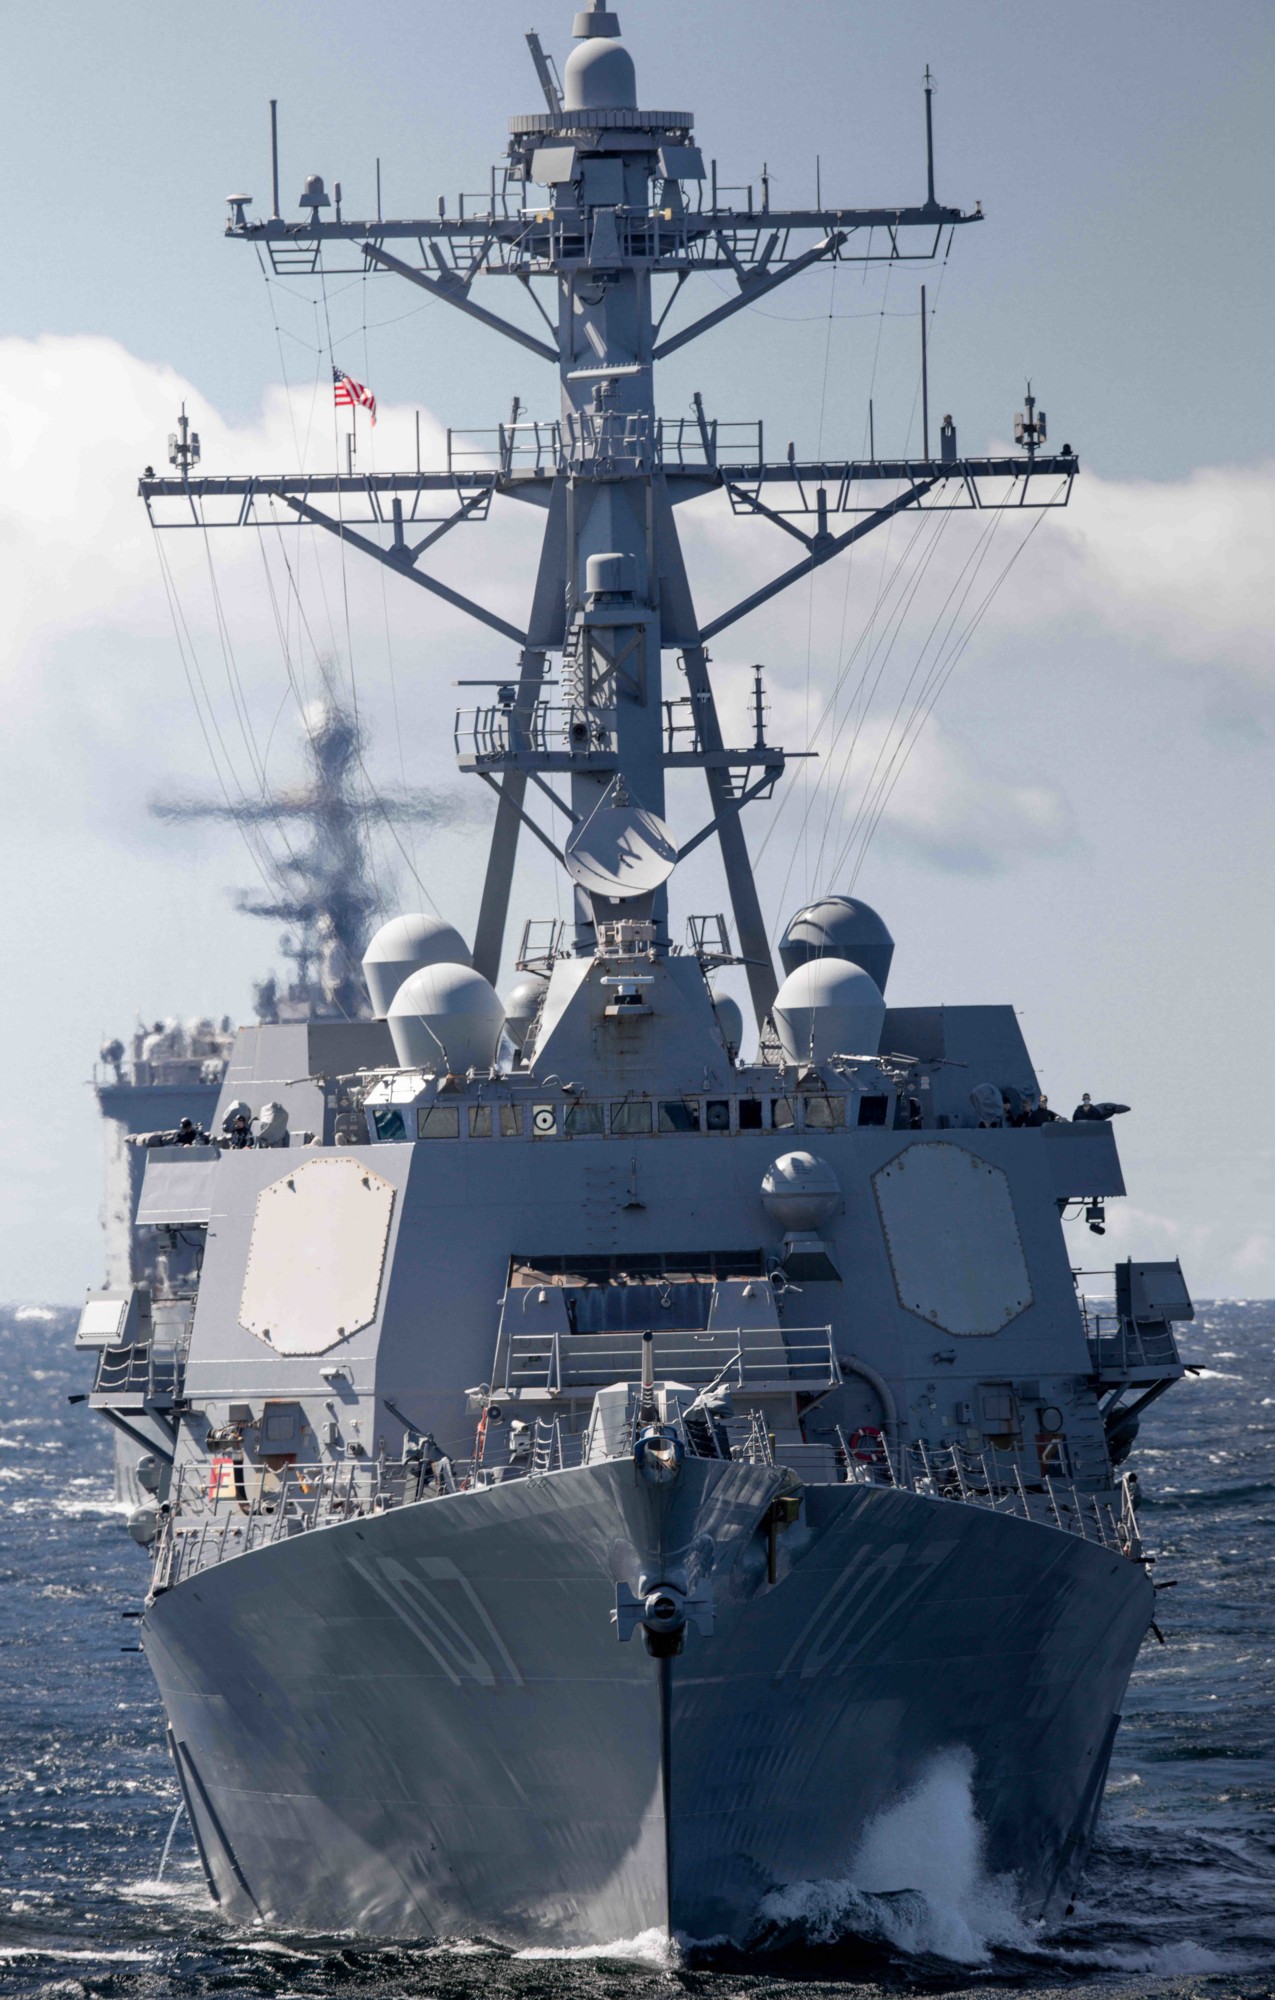 ddg-107 uss gravely arleigh burke class guided missile destroyer aegis us navy baltic sea 60